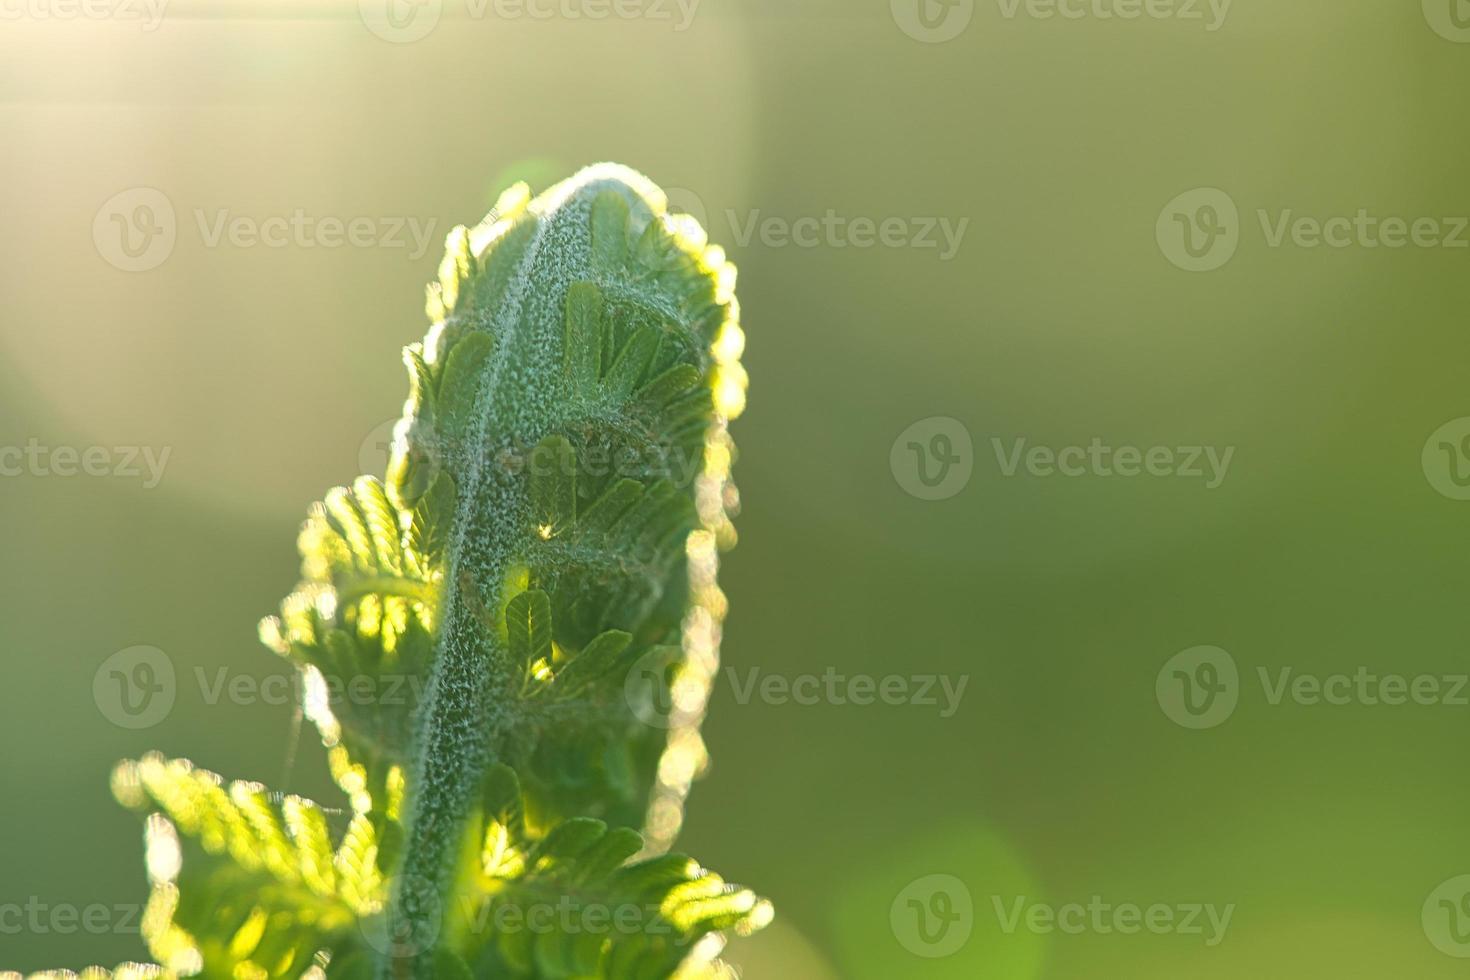 Fern snail with autumn light. Fern leaf in foreground. Blurred background with bokeh photo